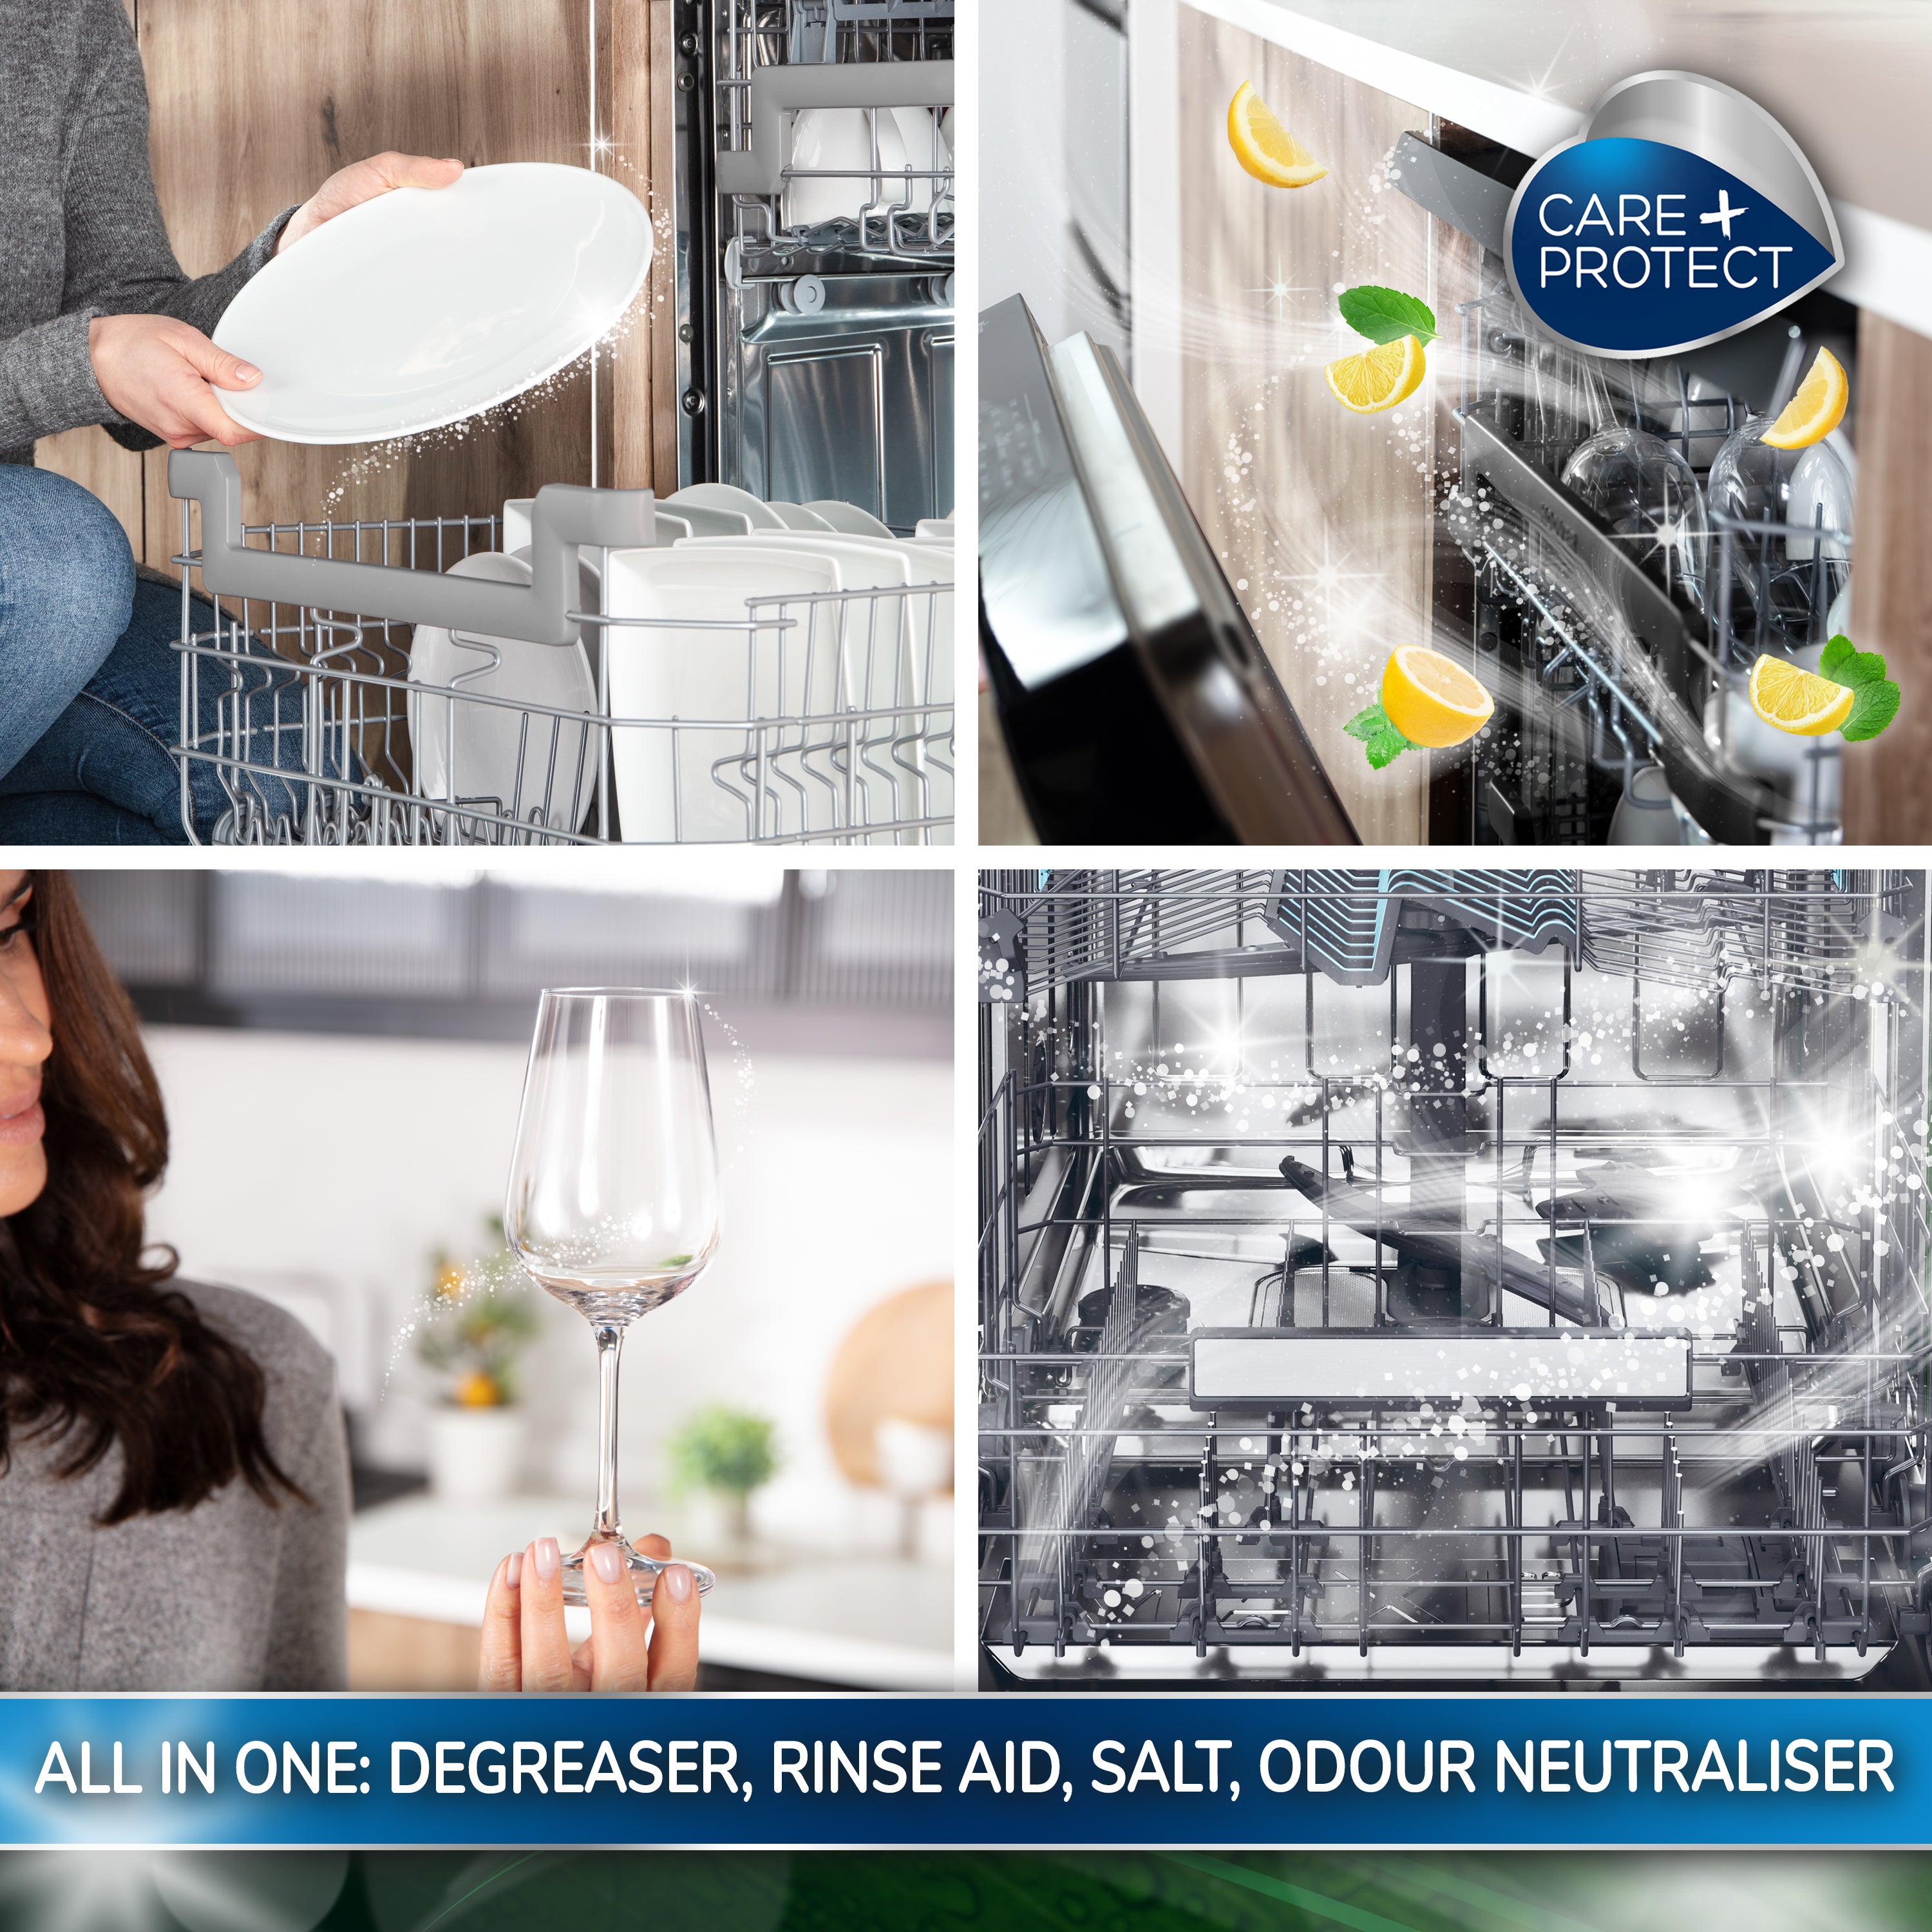 CARE + PROTECT ECO+ Dishwasher Gel, All in One: Degreaser, Rinse Aid, Salt, Odor Neutralizer, Hypoallergenic, Strongly Degreases and Removes Dirt. Active in Short Cycles, 650ml for Upto 38 Washes